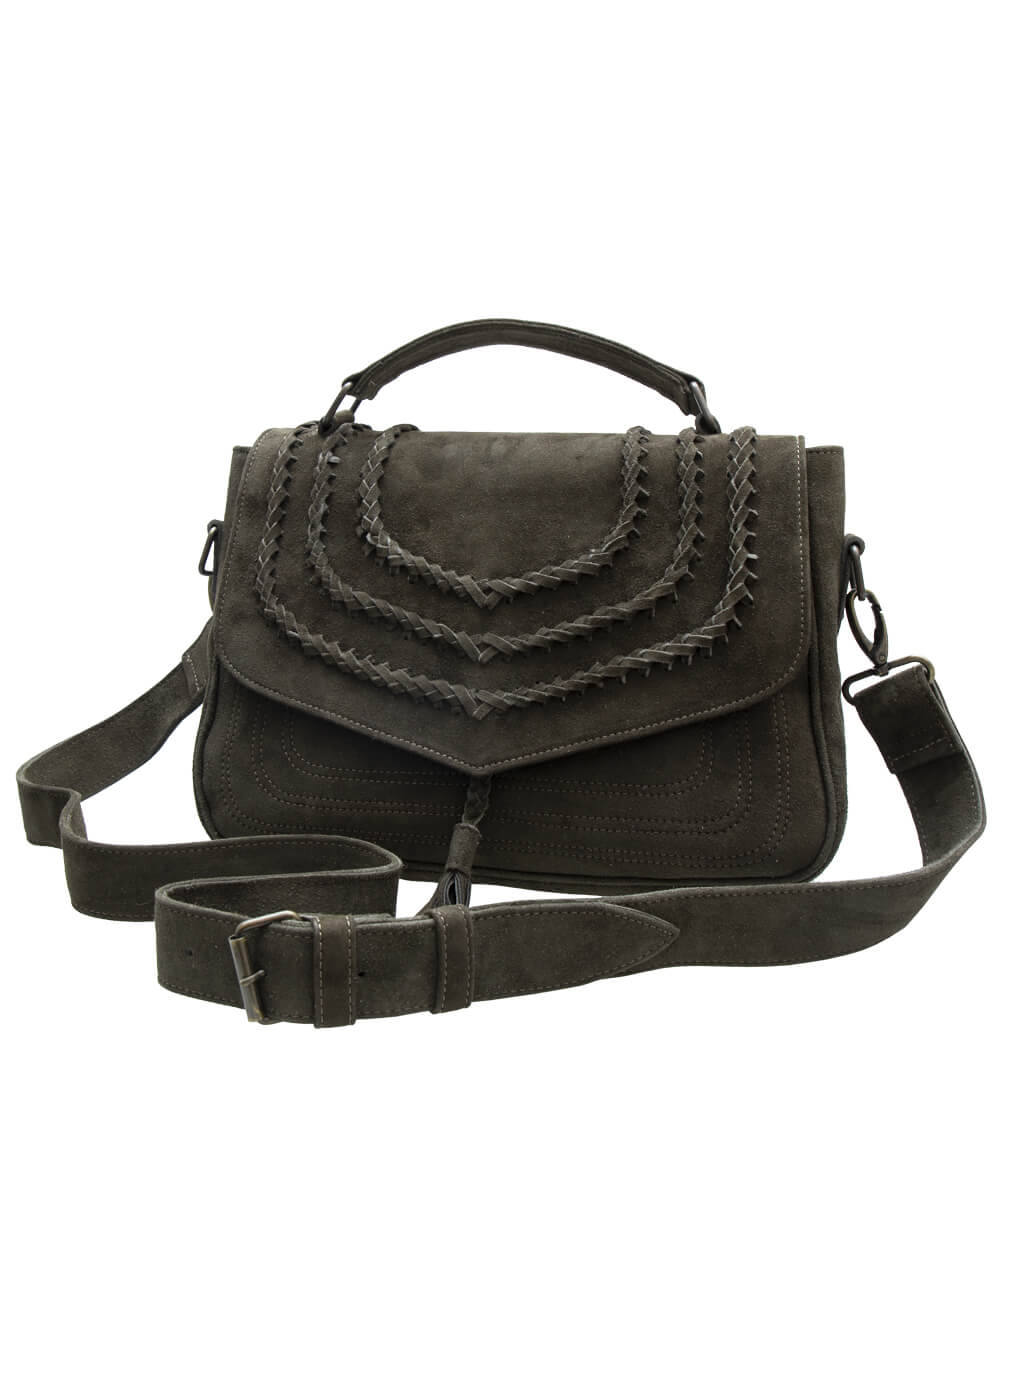 Goat Leather Bag “Just About you”, urban green